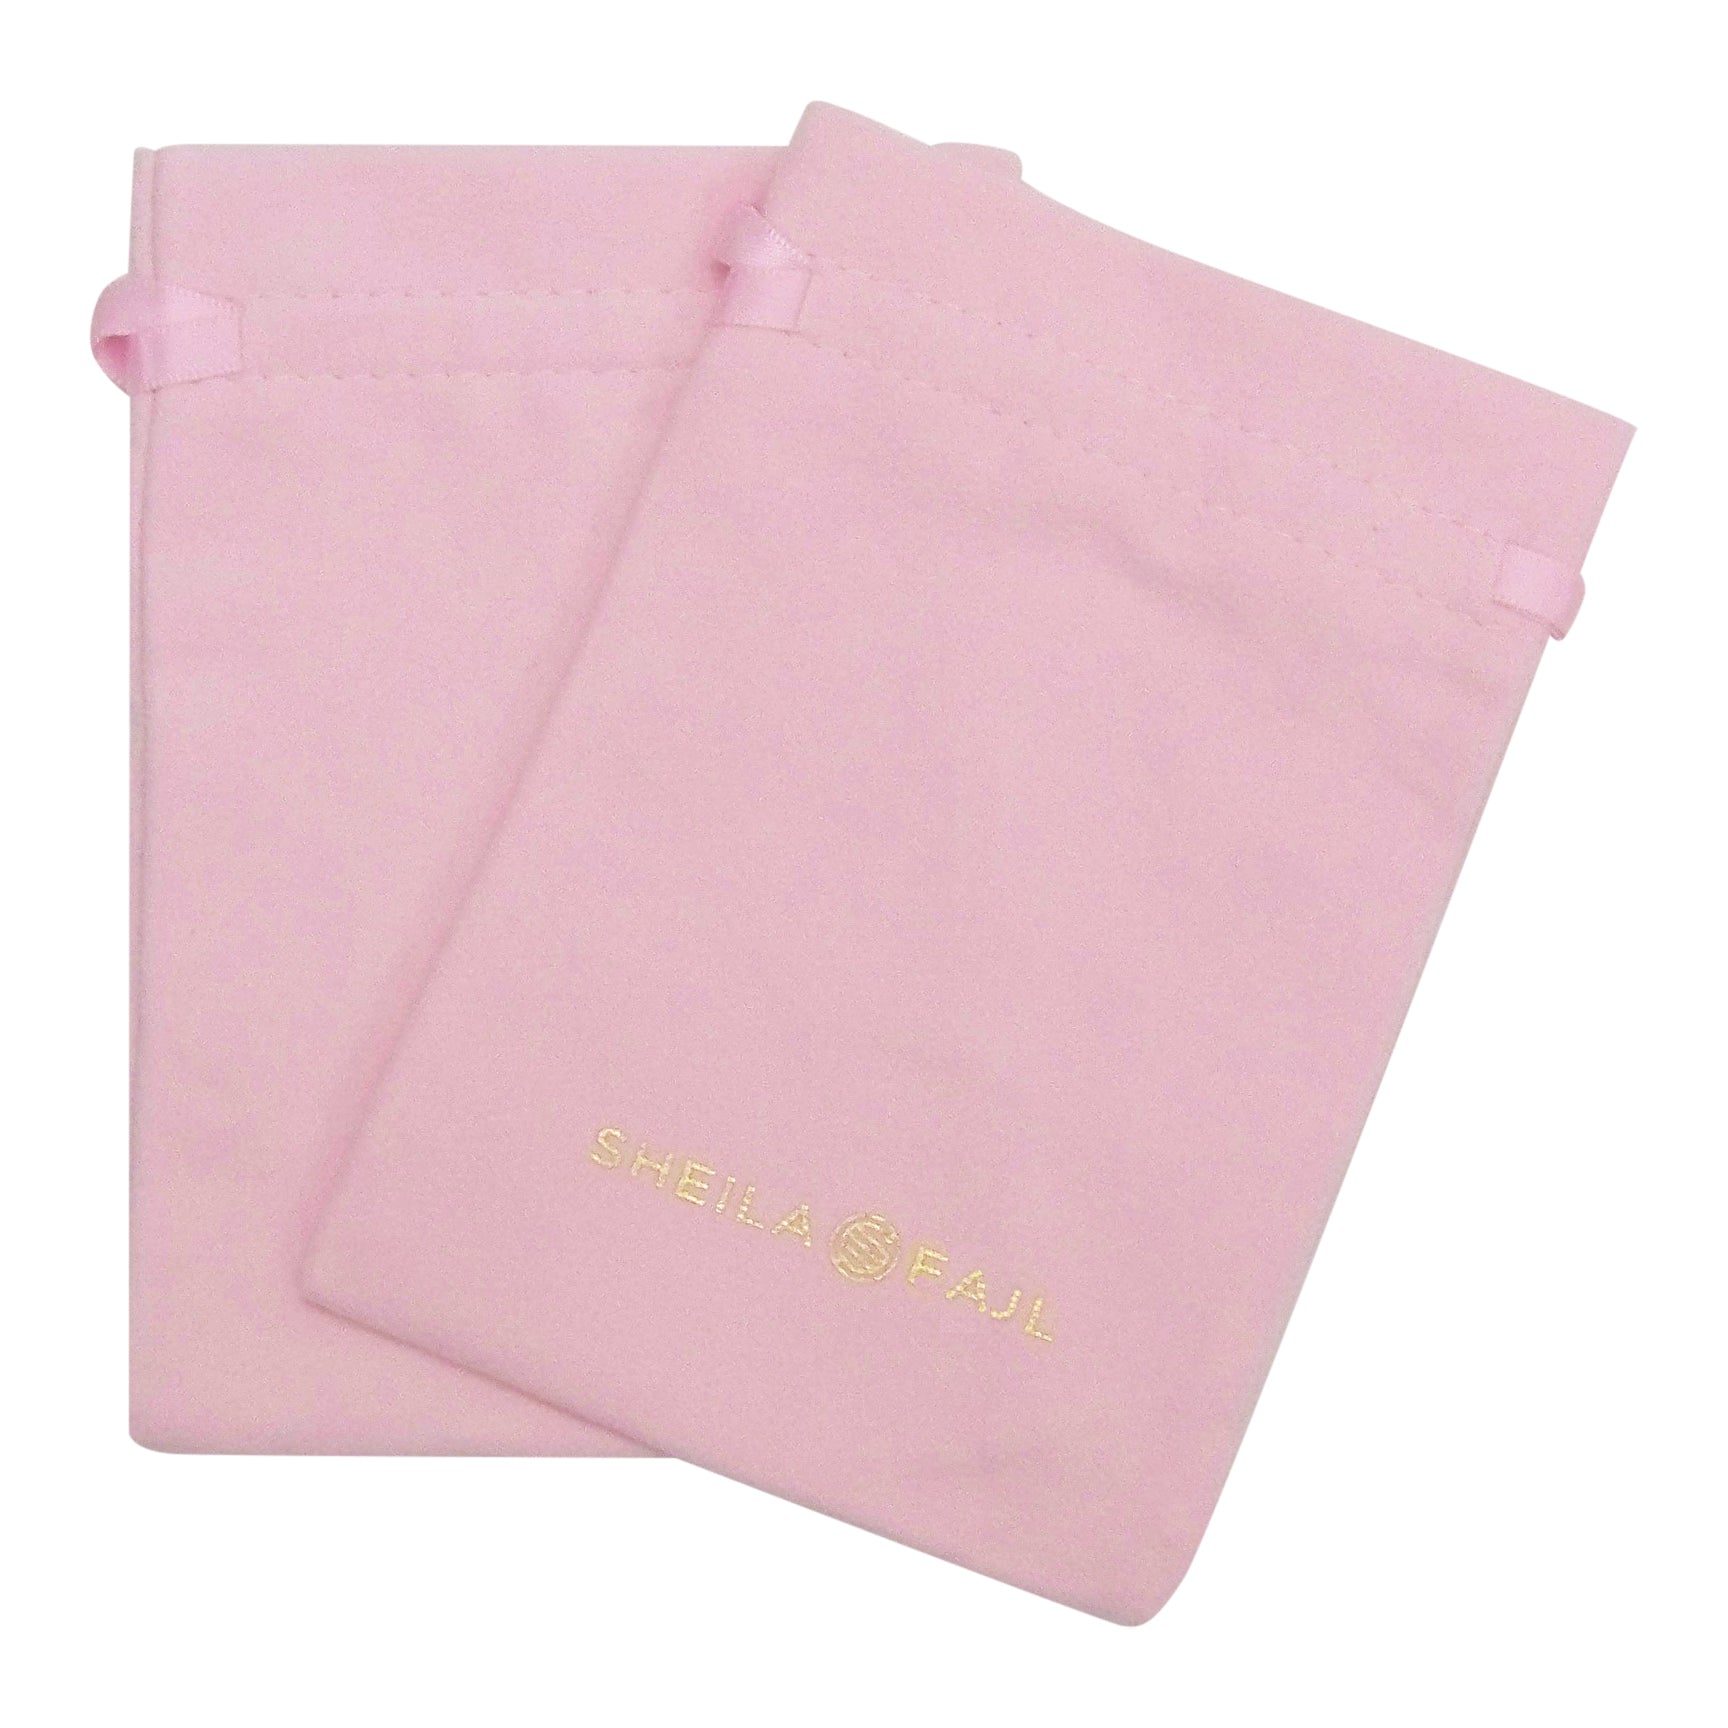 Two Pink Sheila Fajl Fabric Bags Laying Flat Overlapping